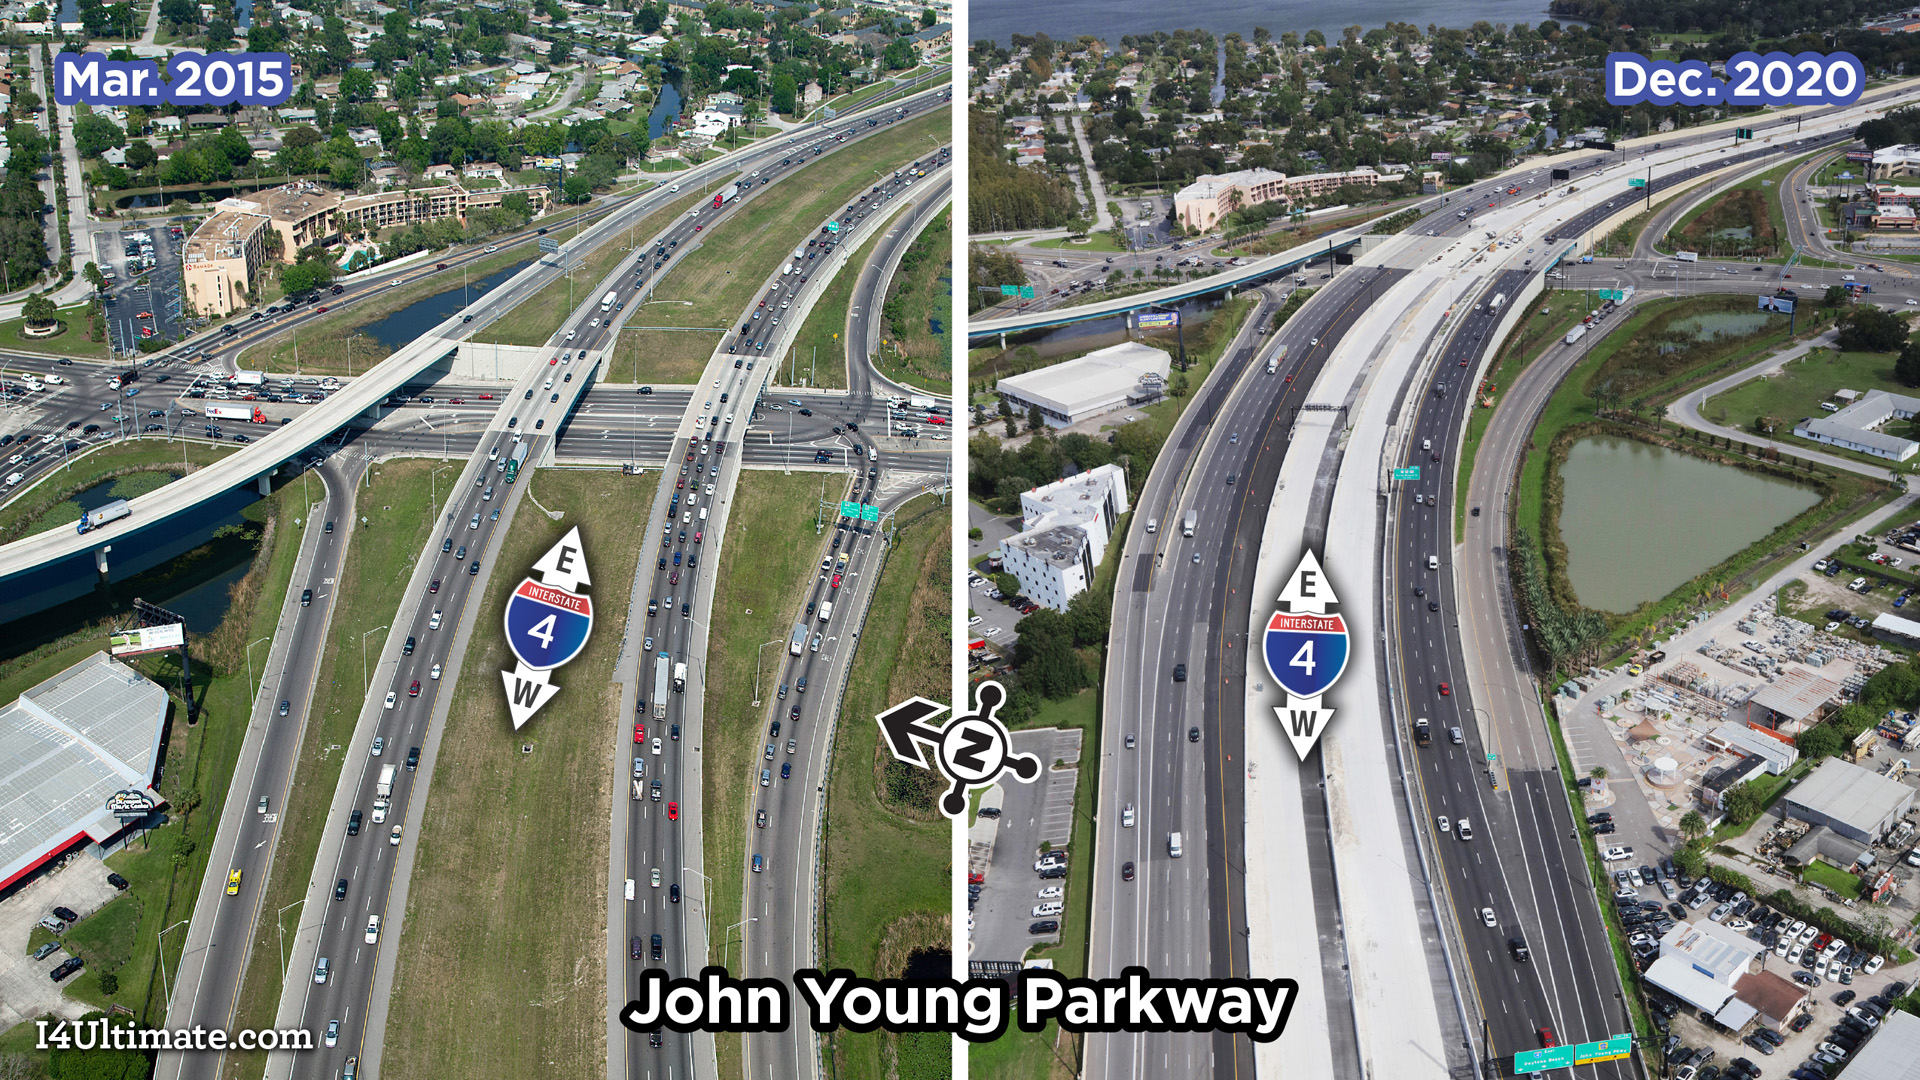 4738-I4Ultimate-GUL-campaign-images-20210212-06-John-Young-Parkway